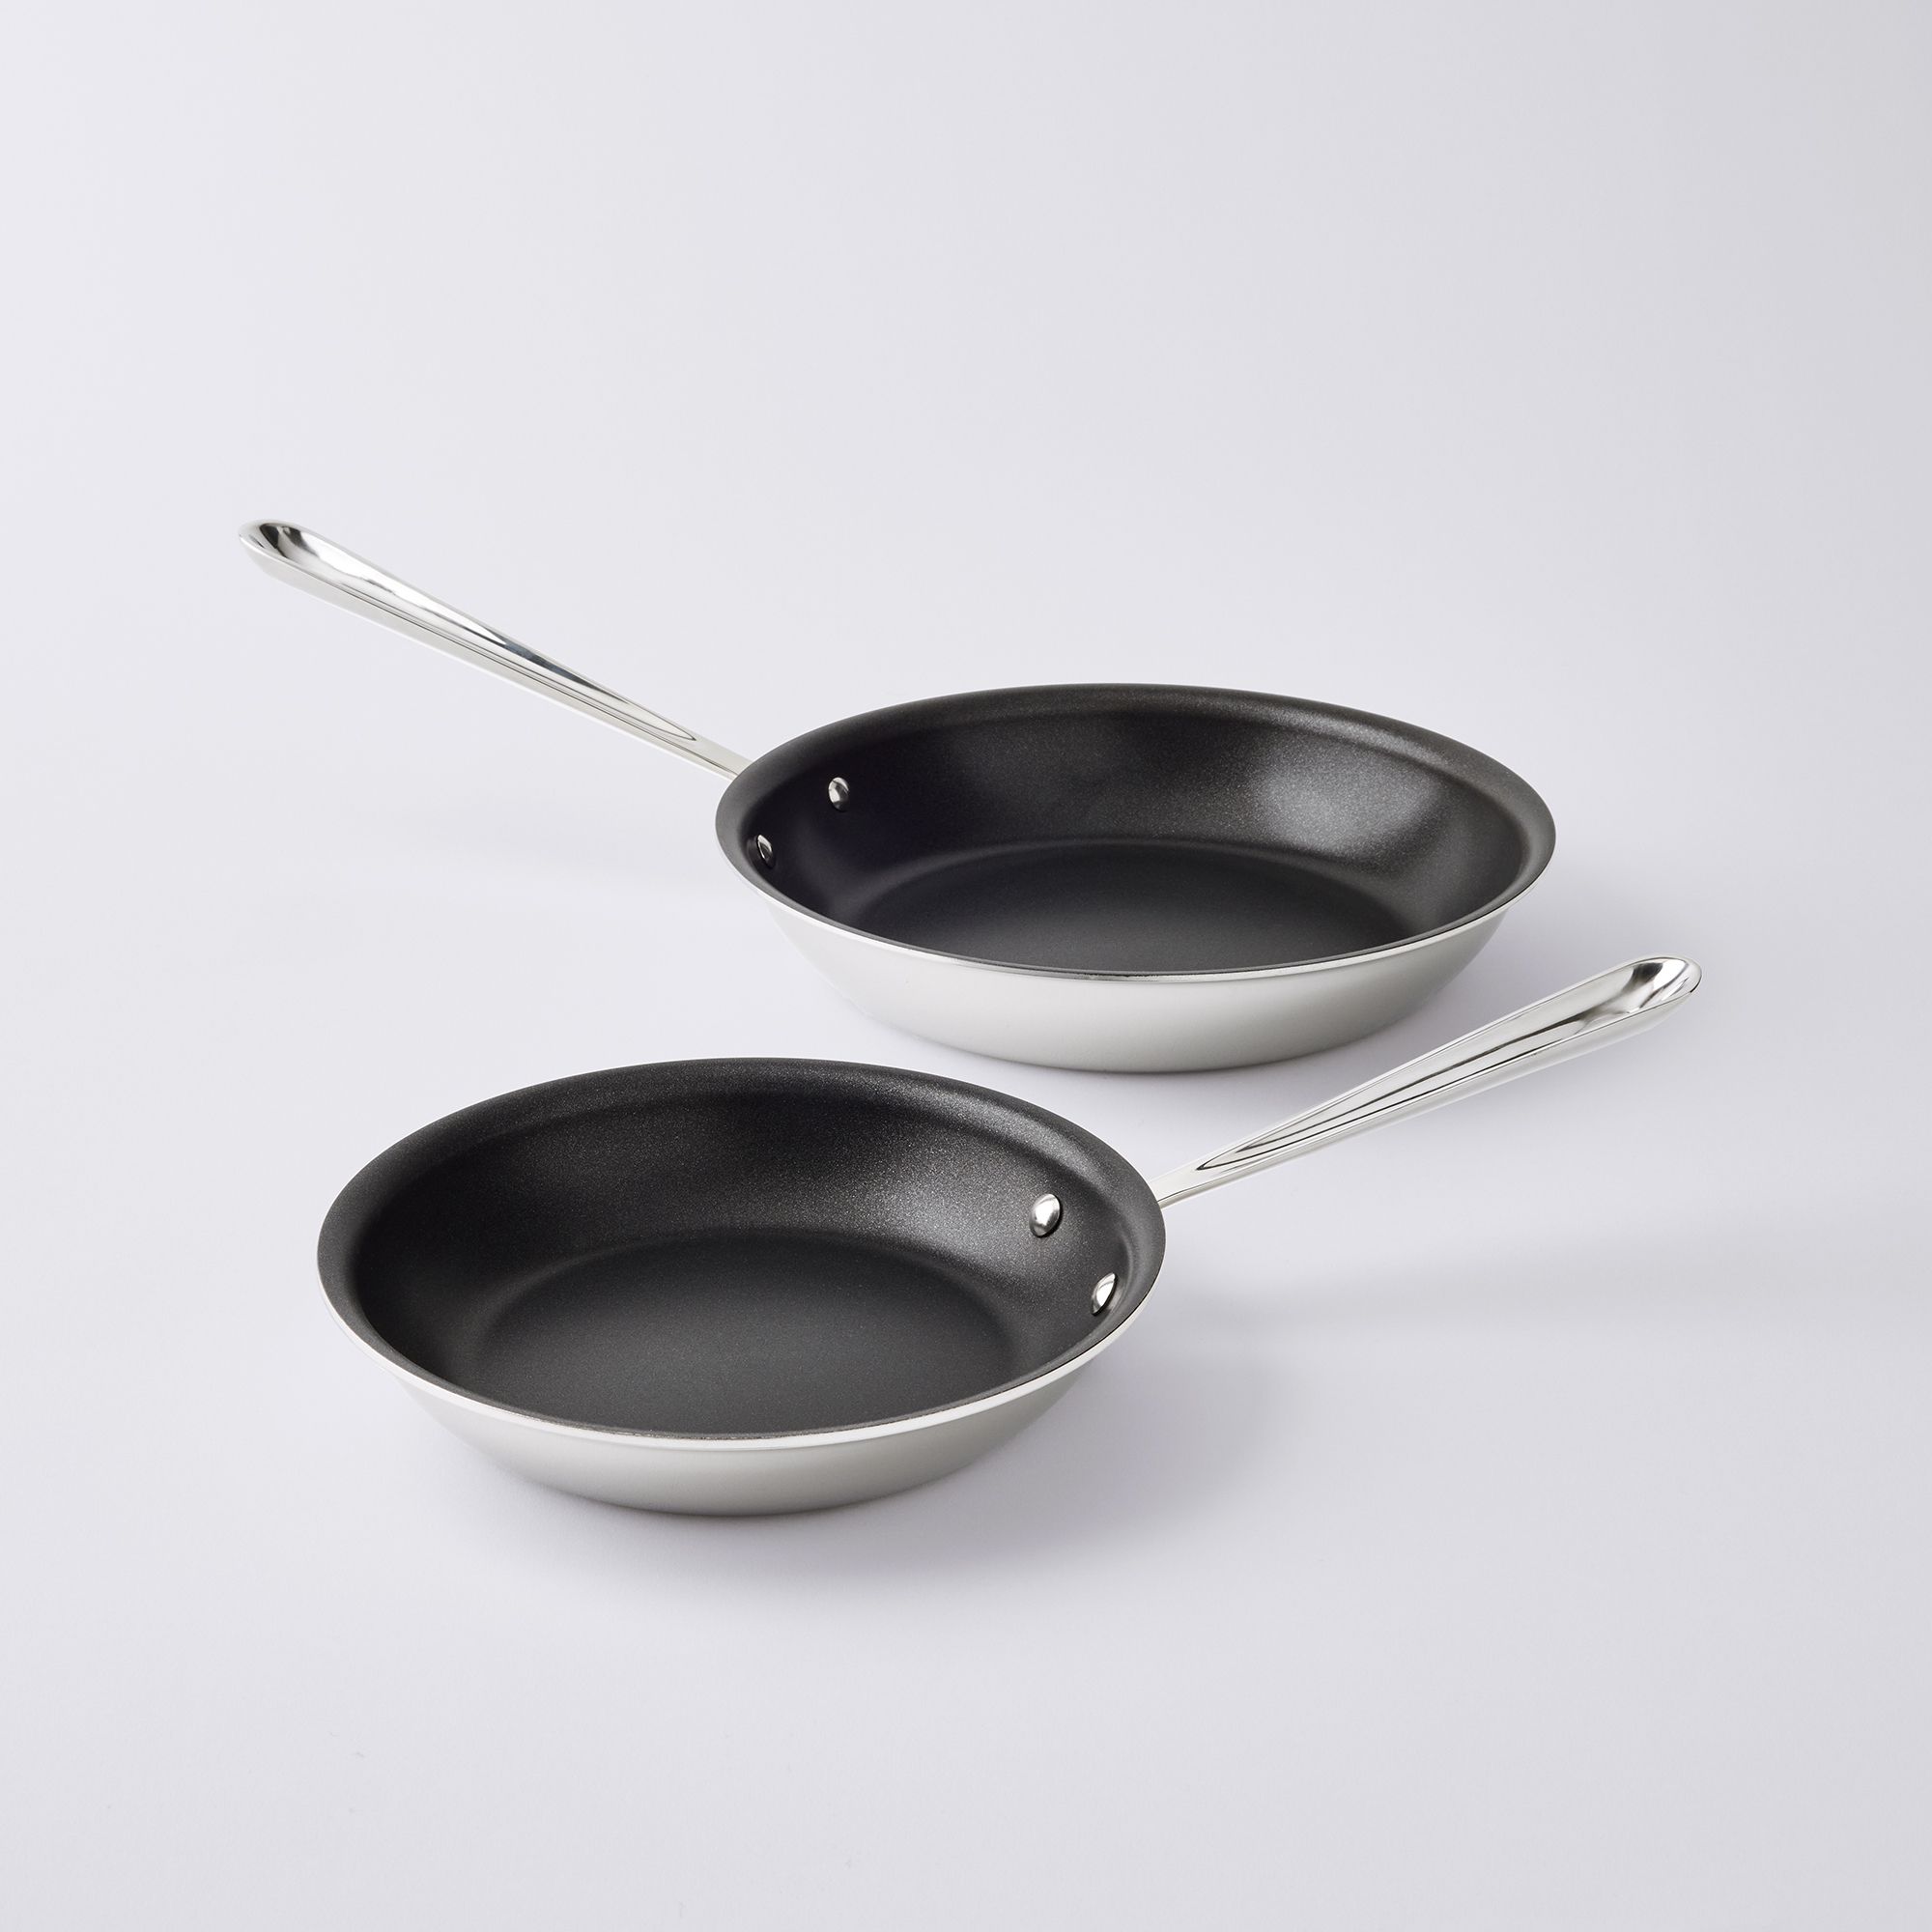 All-Clad All-Clad10 inch Stainless Steel Frying Pan 